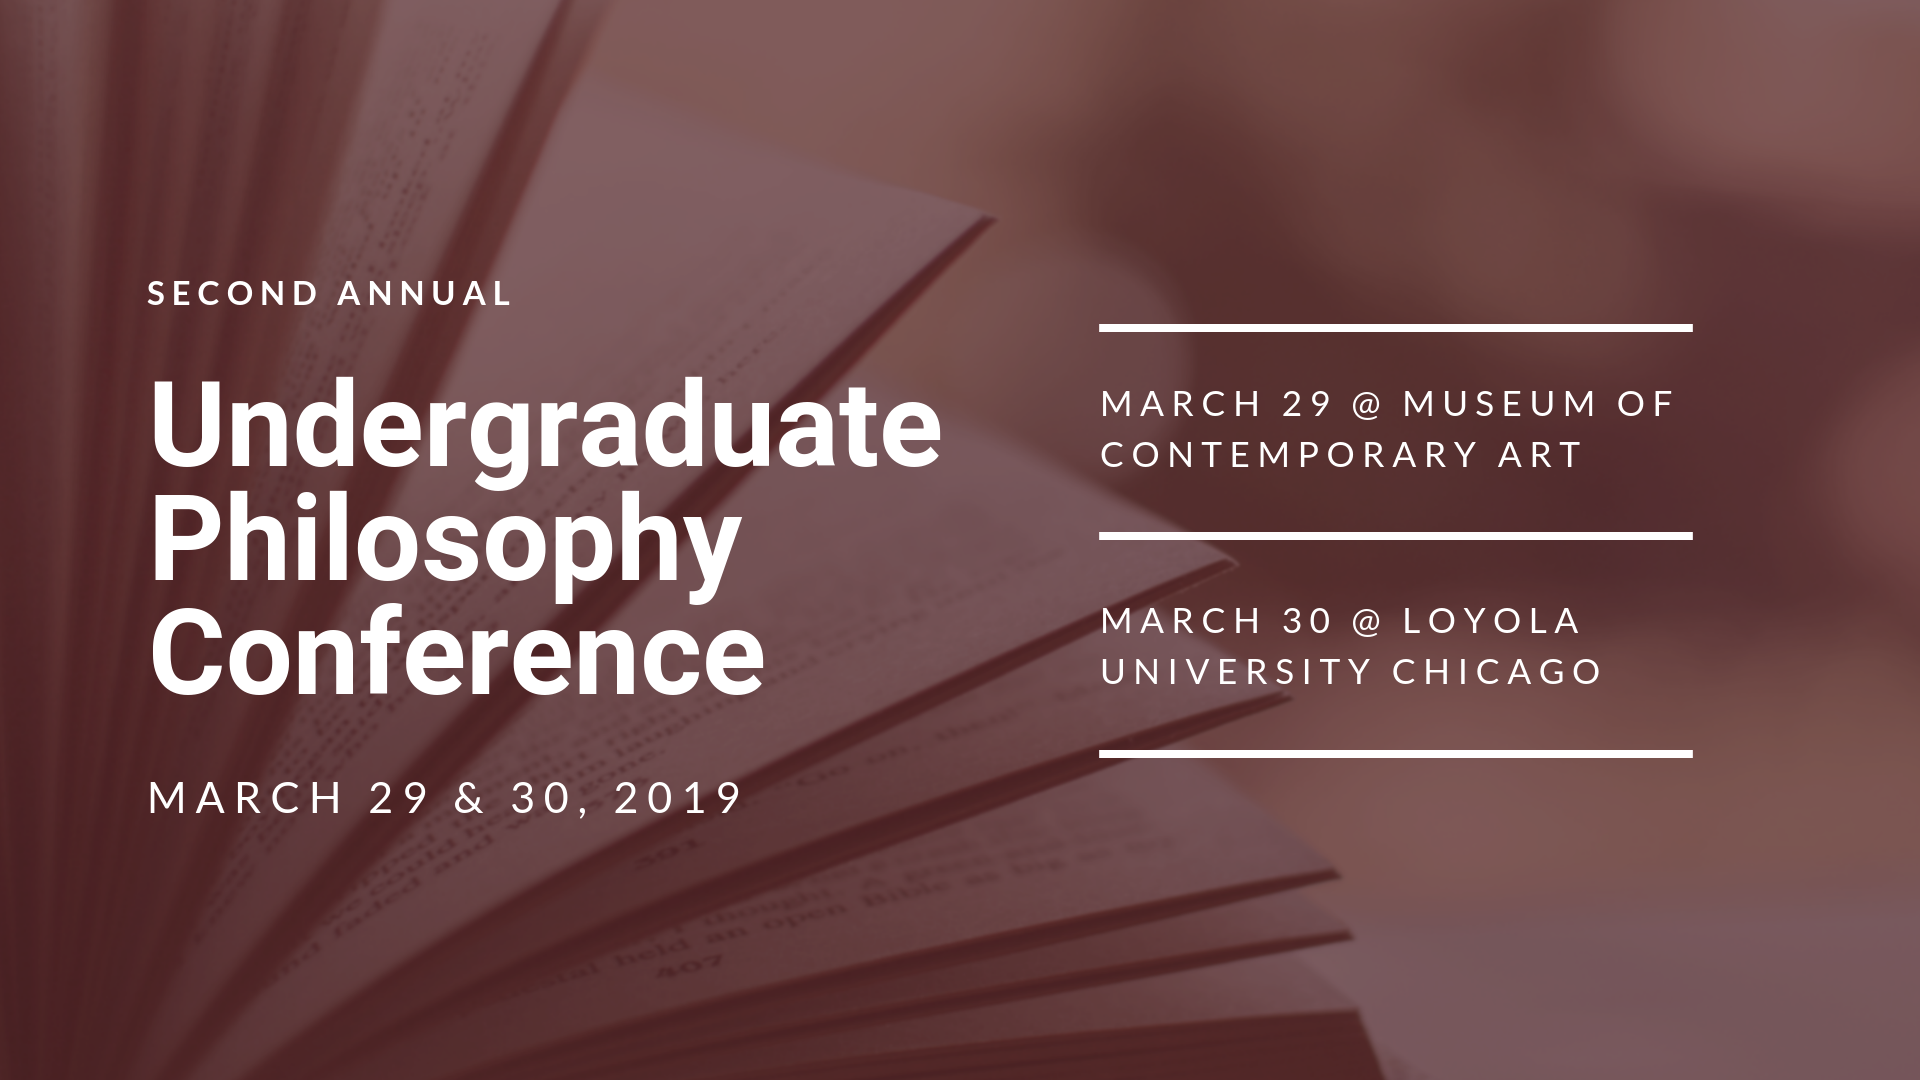 Undergraduate philosophy conference: March 29 at the Museum of Contemporary Art and March 30 at Loyola University Chicago. 